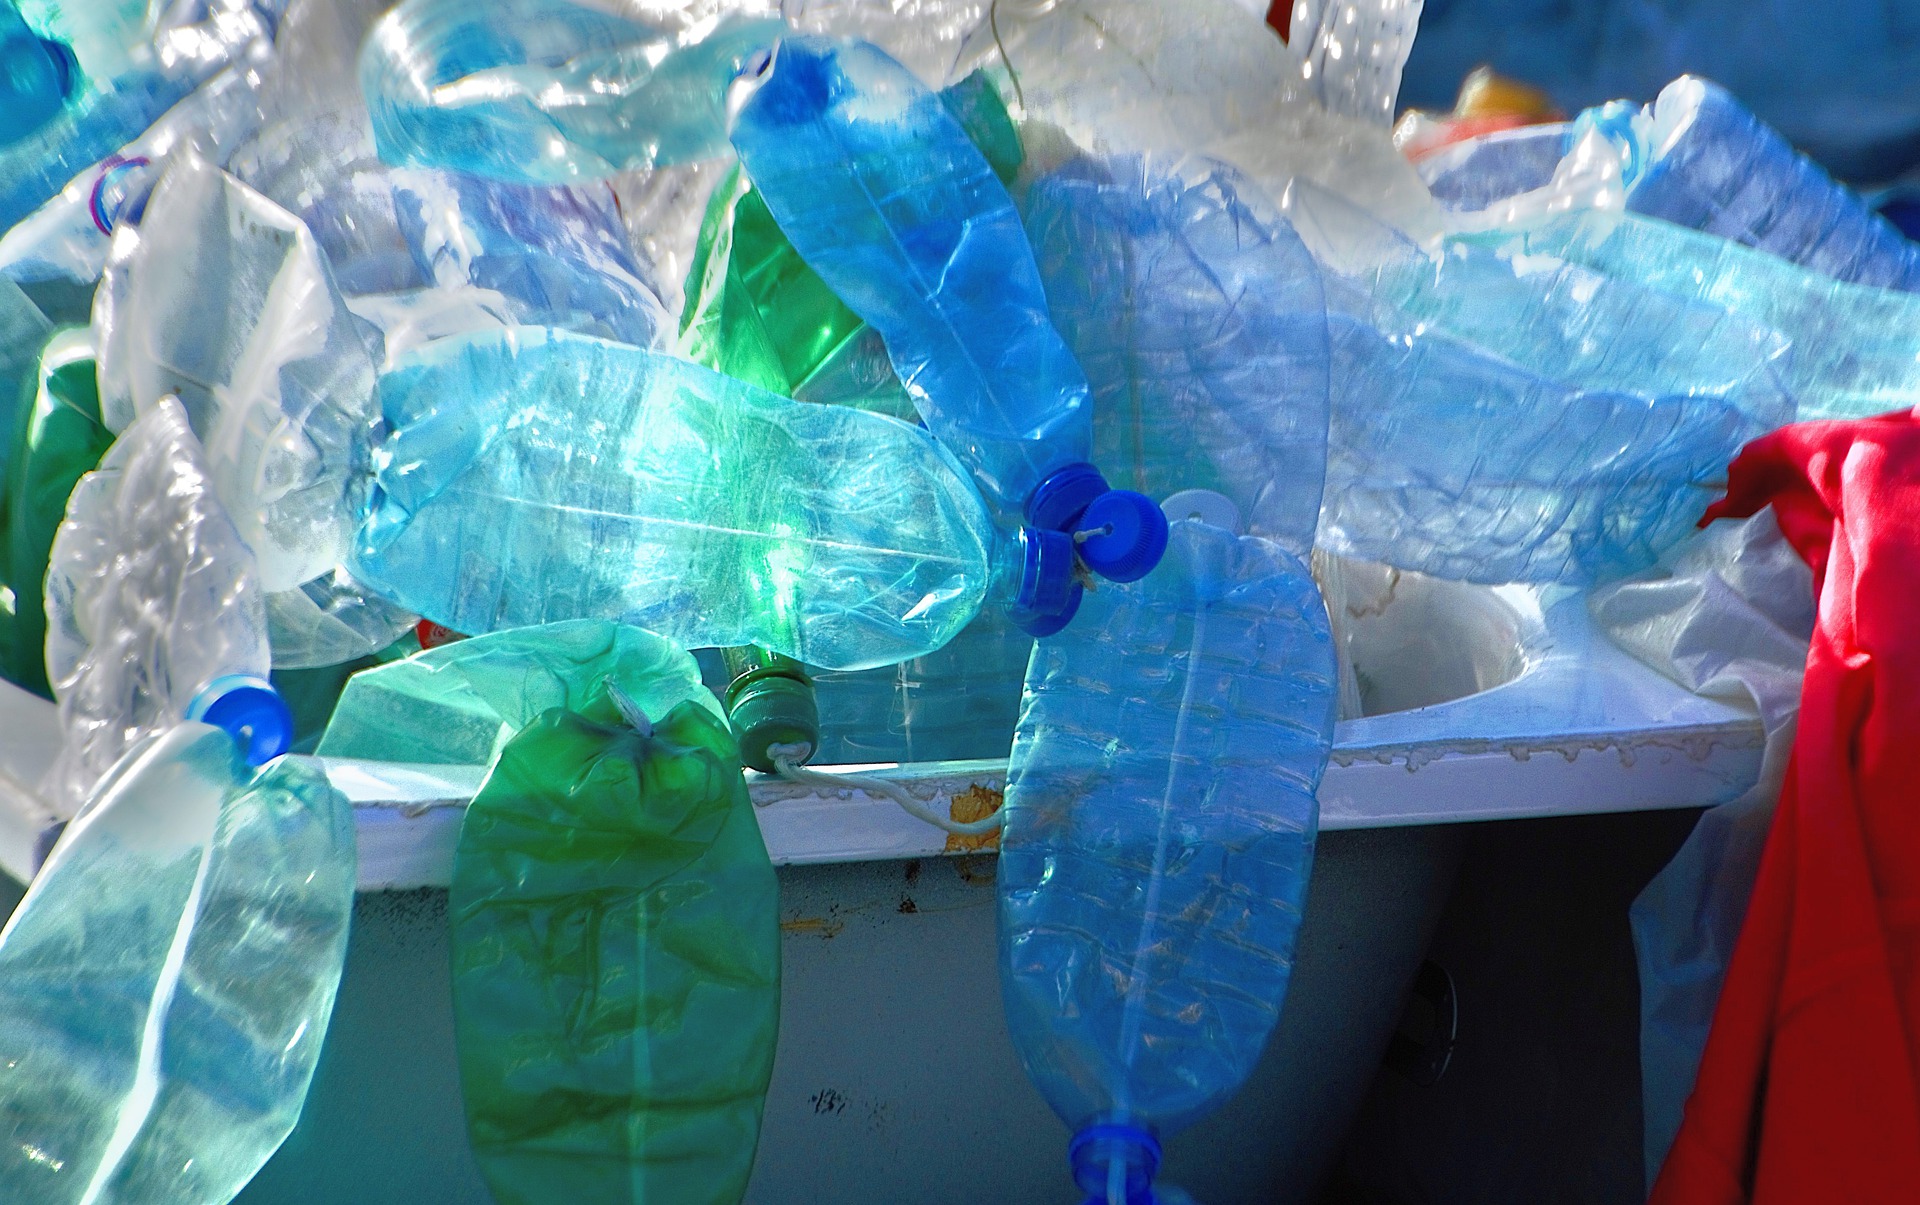 Much against common belief, plastics do decompose, but into what?